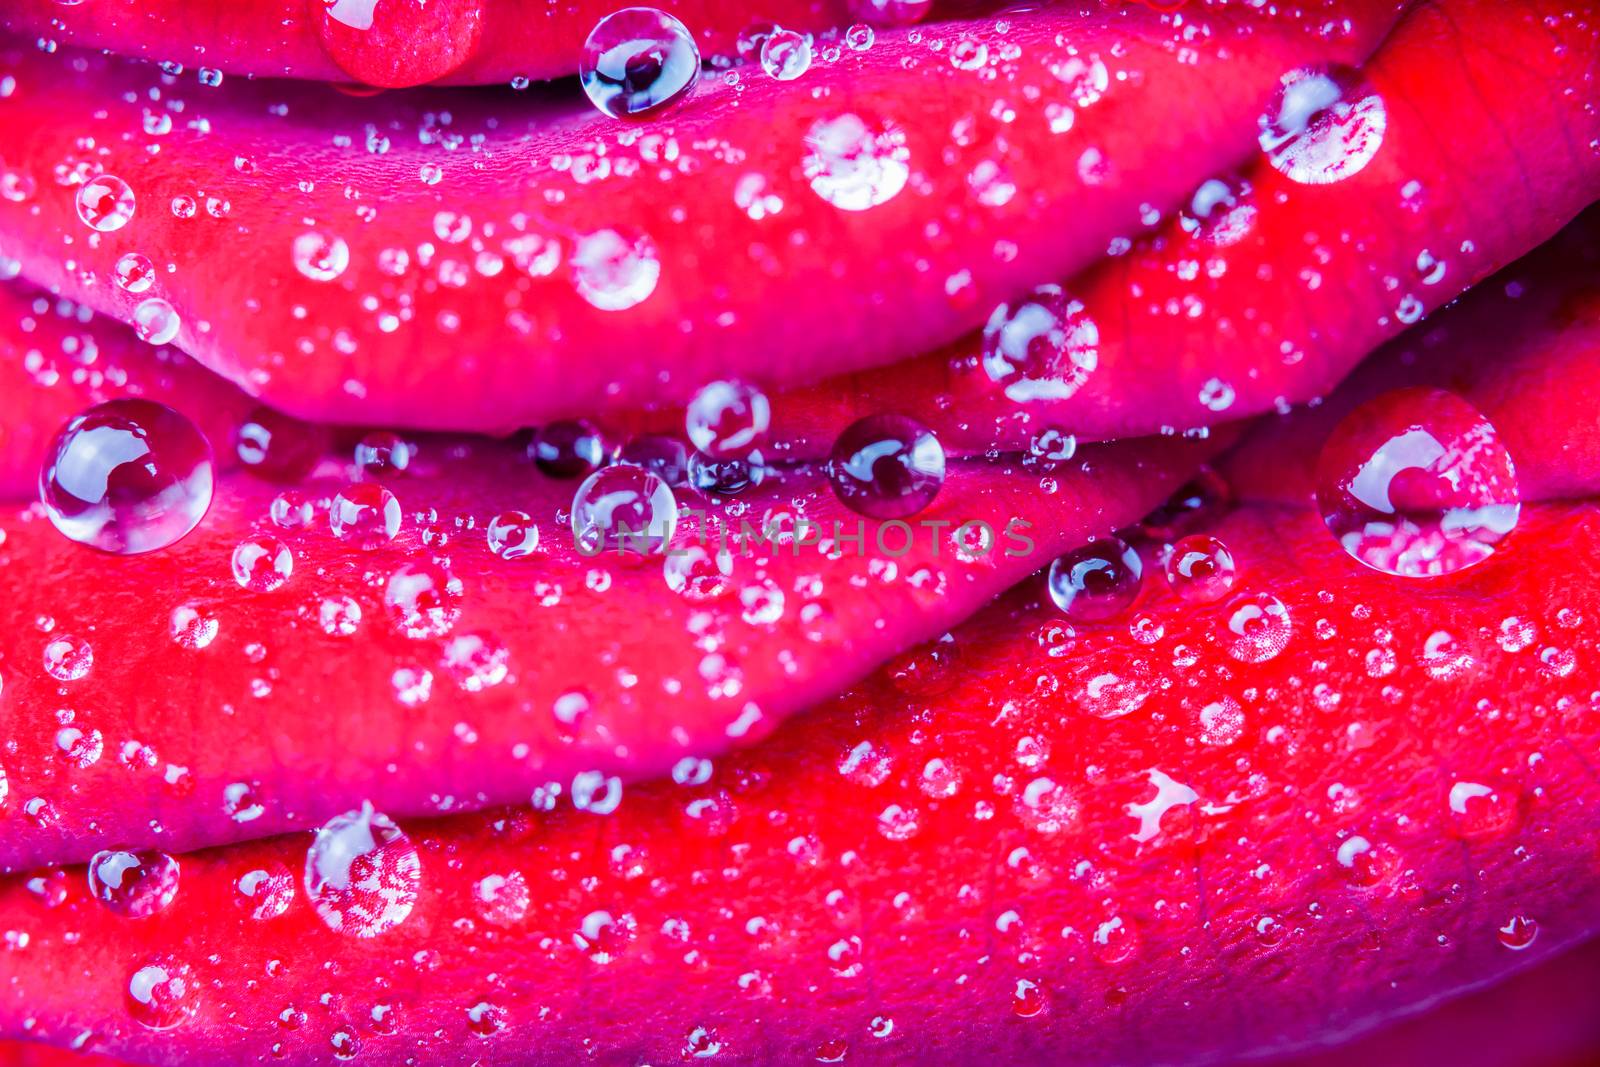 Macro round water drops on red rose by BenSchonewille